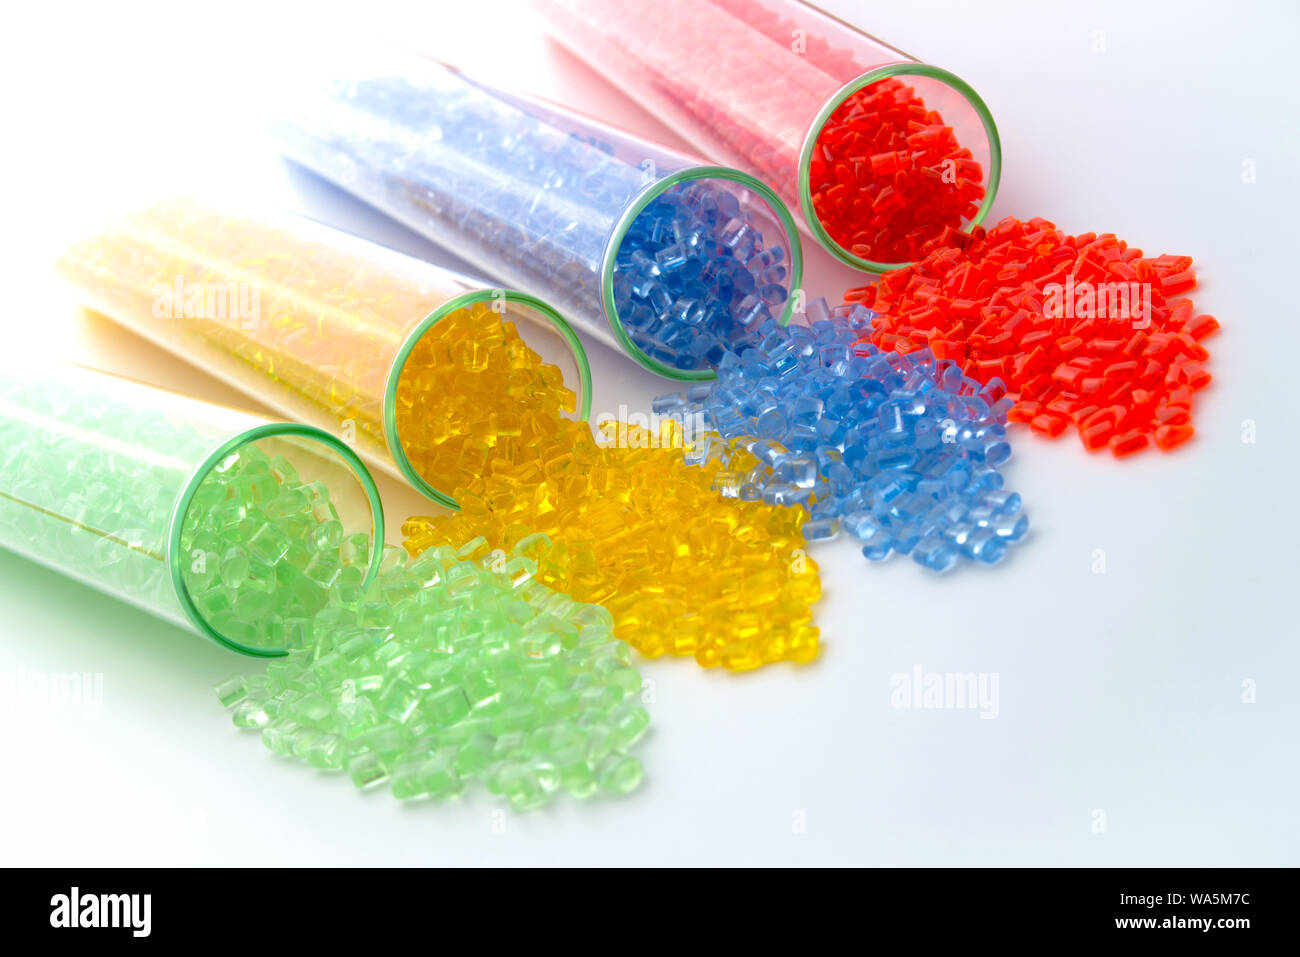 dyed polymer resin for injection molding Stock Photo